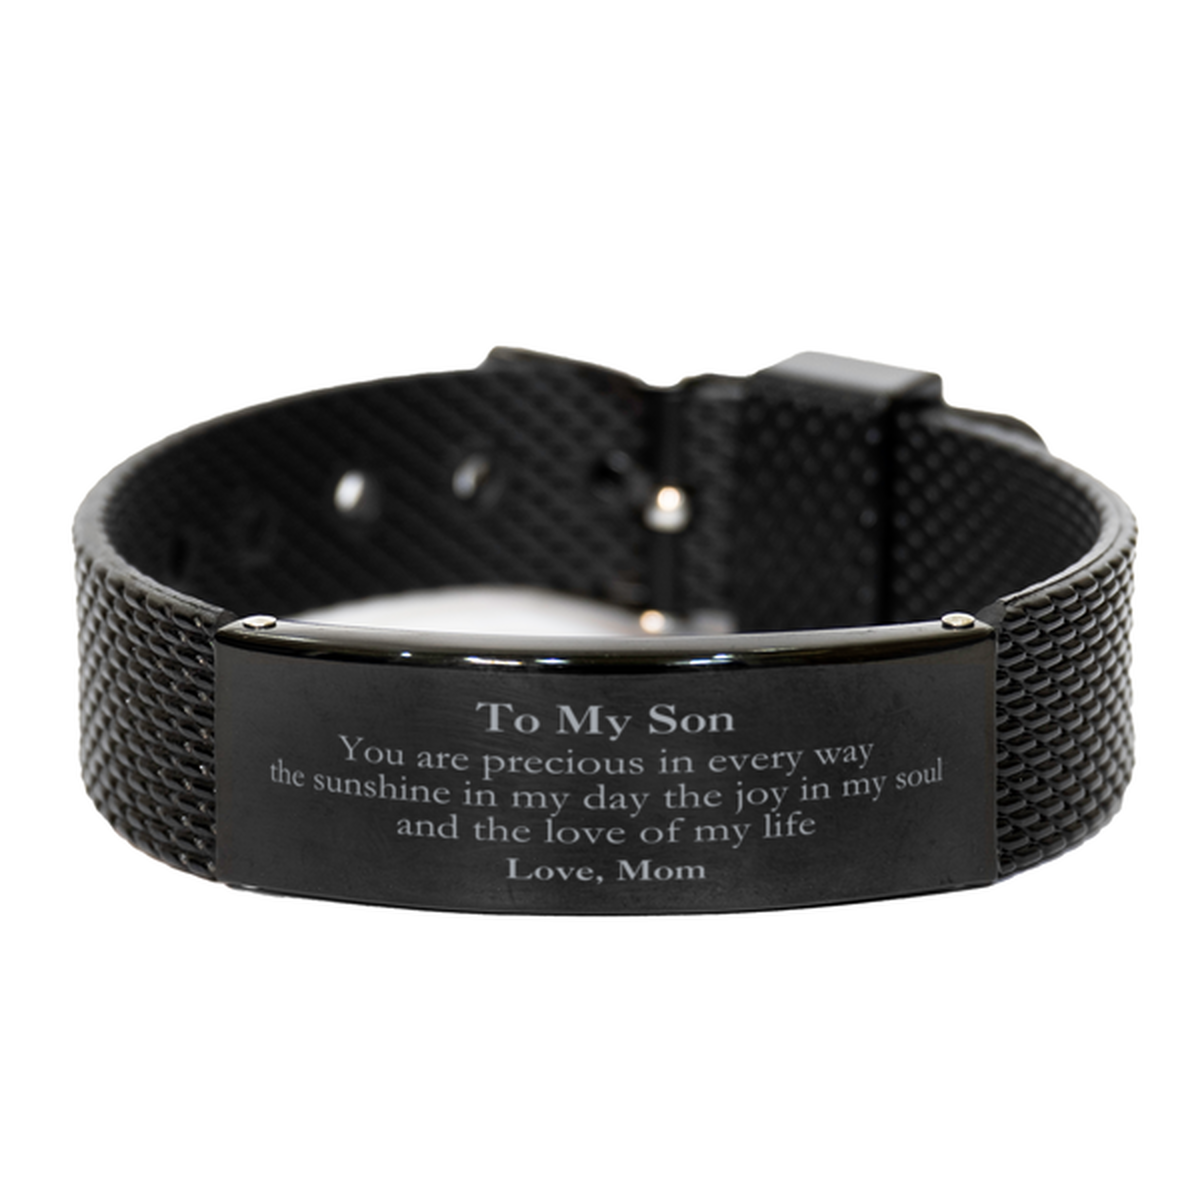 Graduation Gifts for Son Black Shark Mesh Bracelet Present from Mom, Christmas Son Birthday Gifts Son You are precious in every way the sunshine in my day. Love, Mom